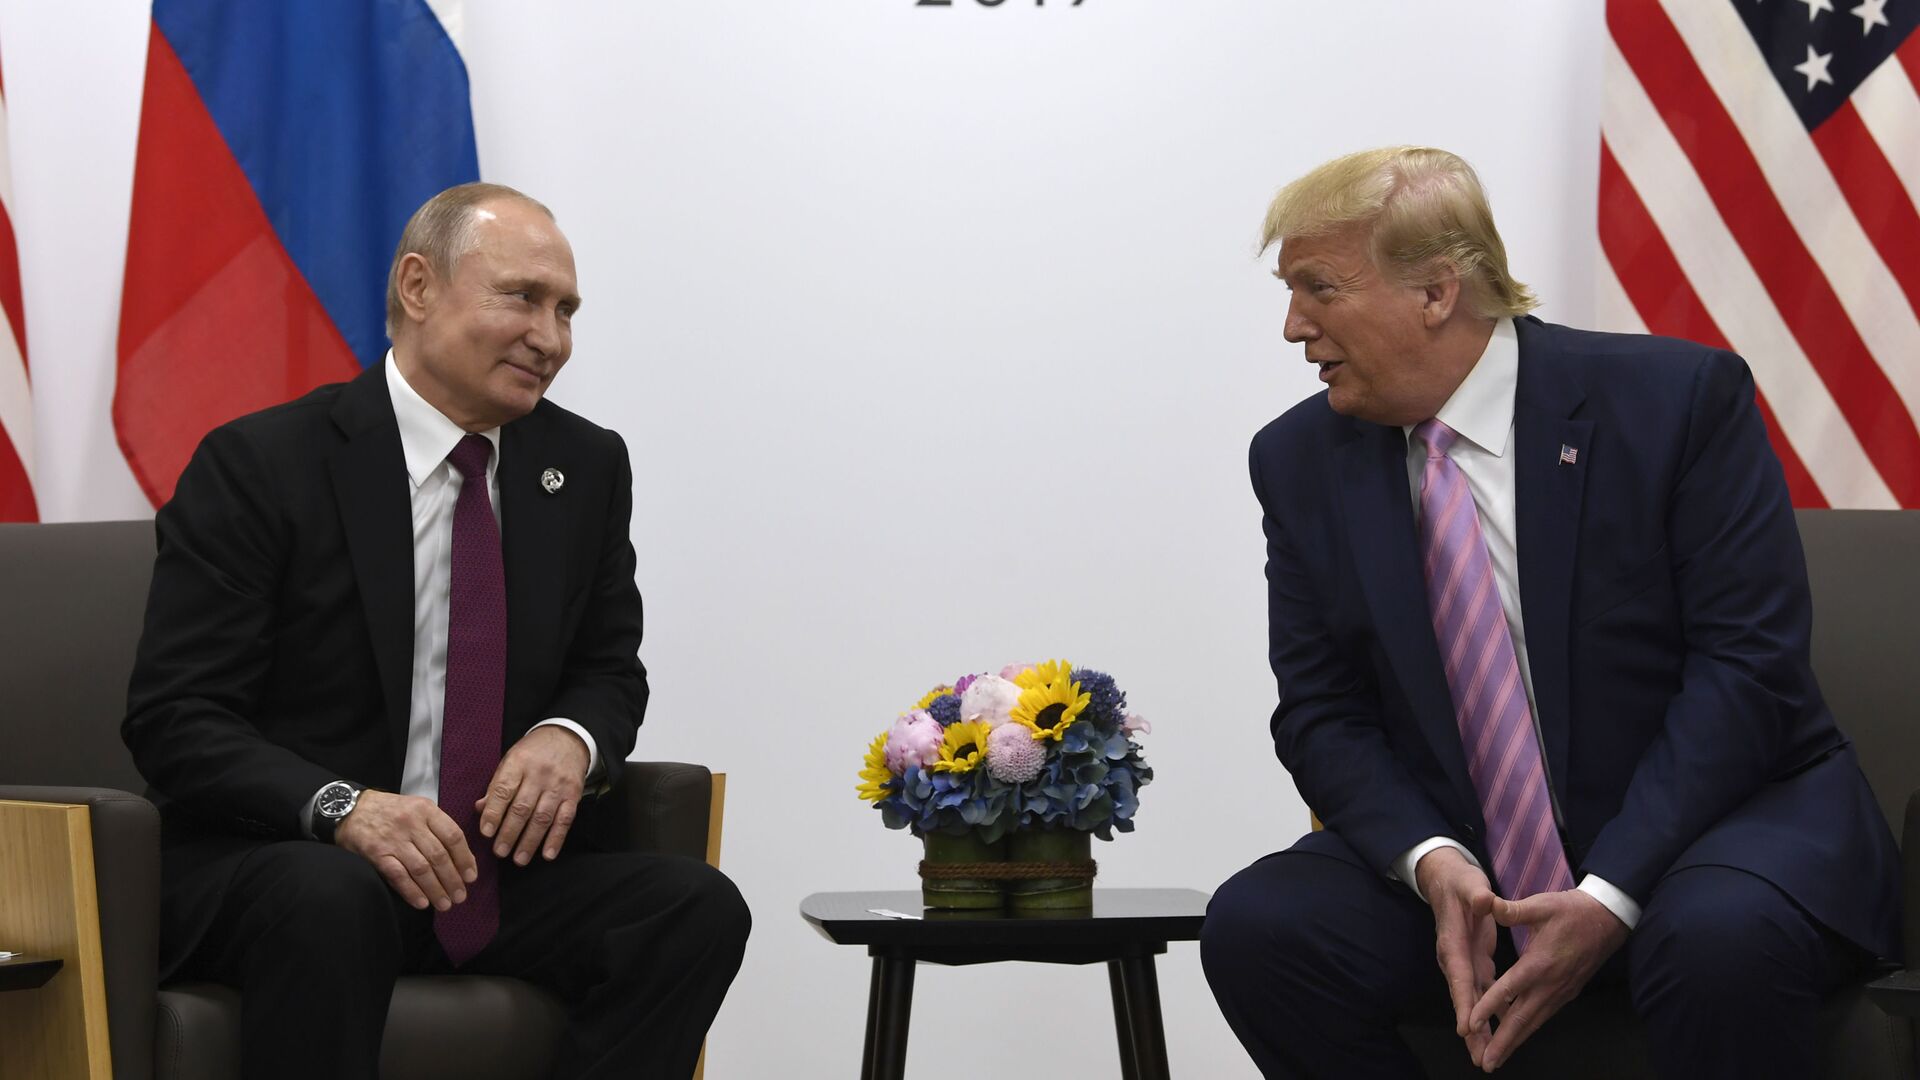  In this June 28, 2019, file photo, President Donald Trump, right, meets with Russian President Vladimir Putin during a bilateral meeting on the sidelines of the G-20 summit in Osaka, Japan. - Sputnik International, 1920, 23.02.2022